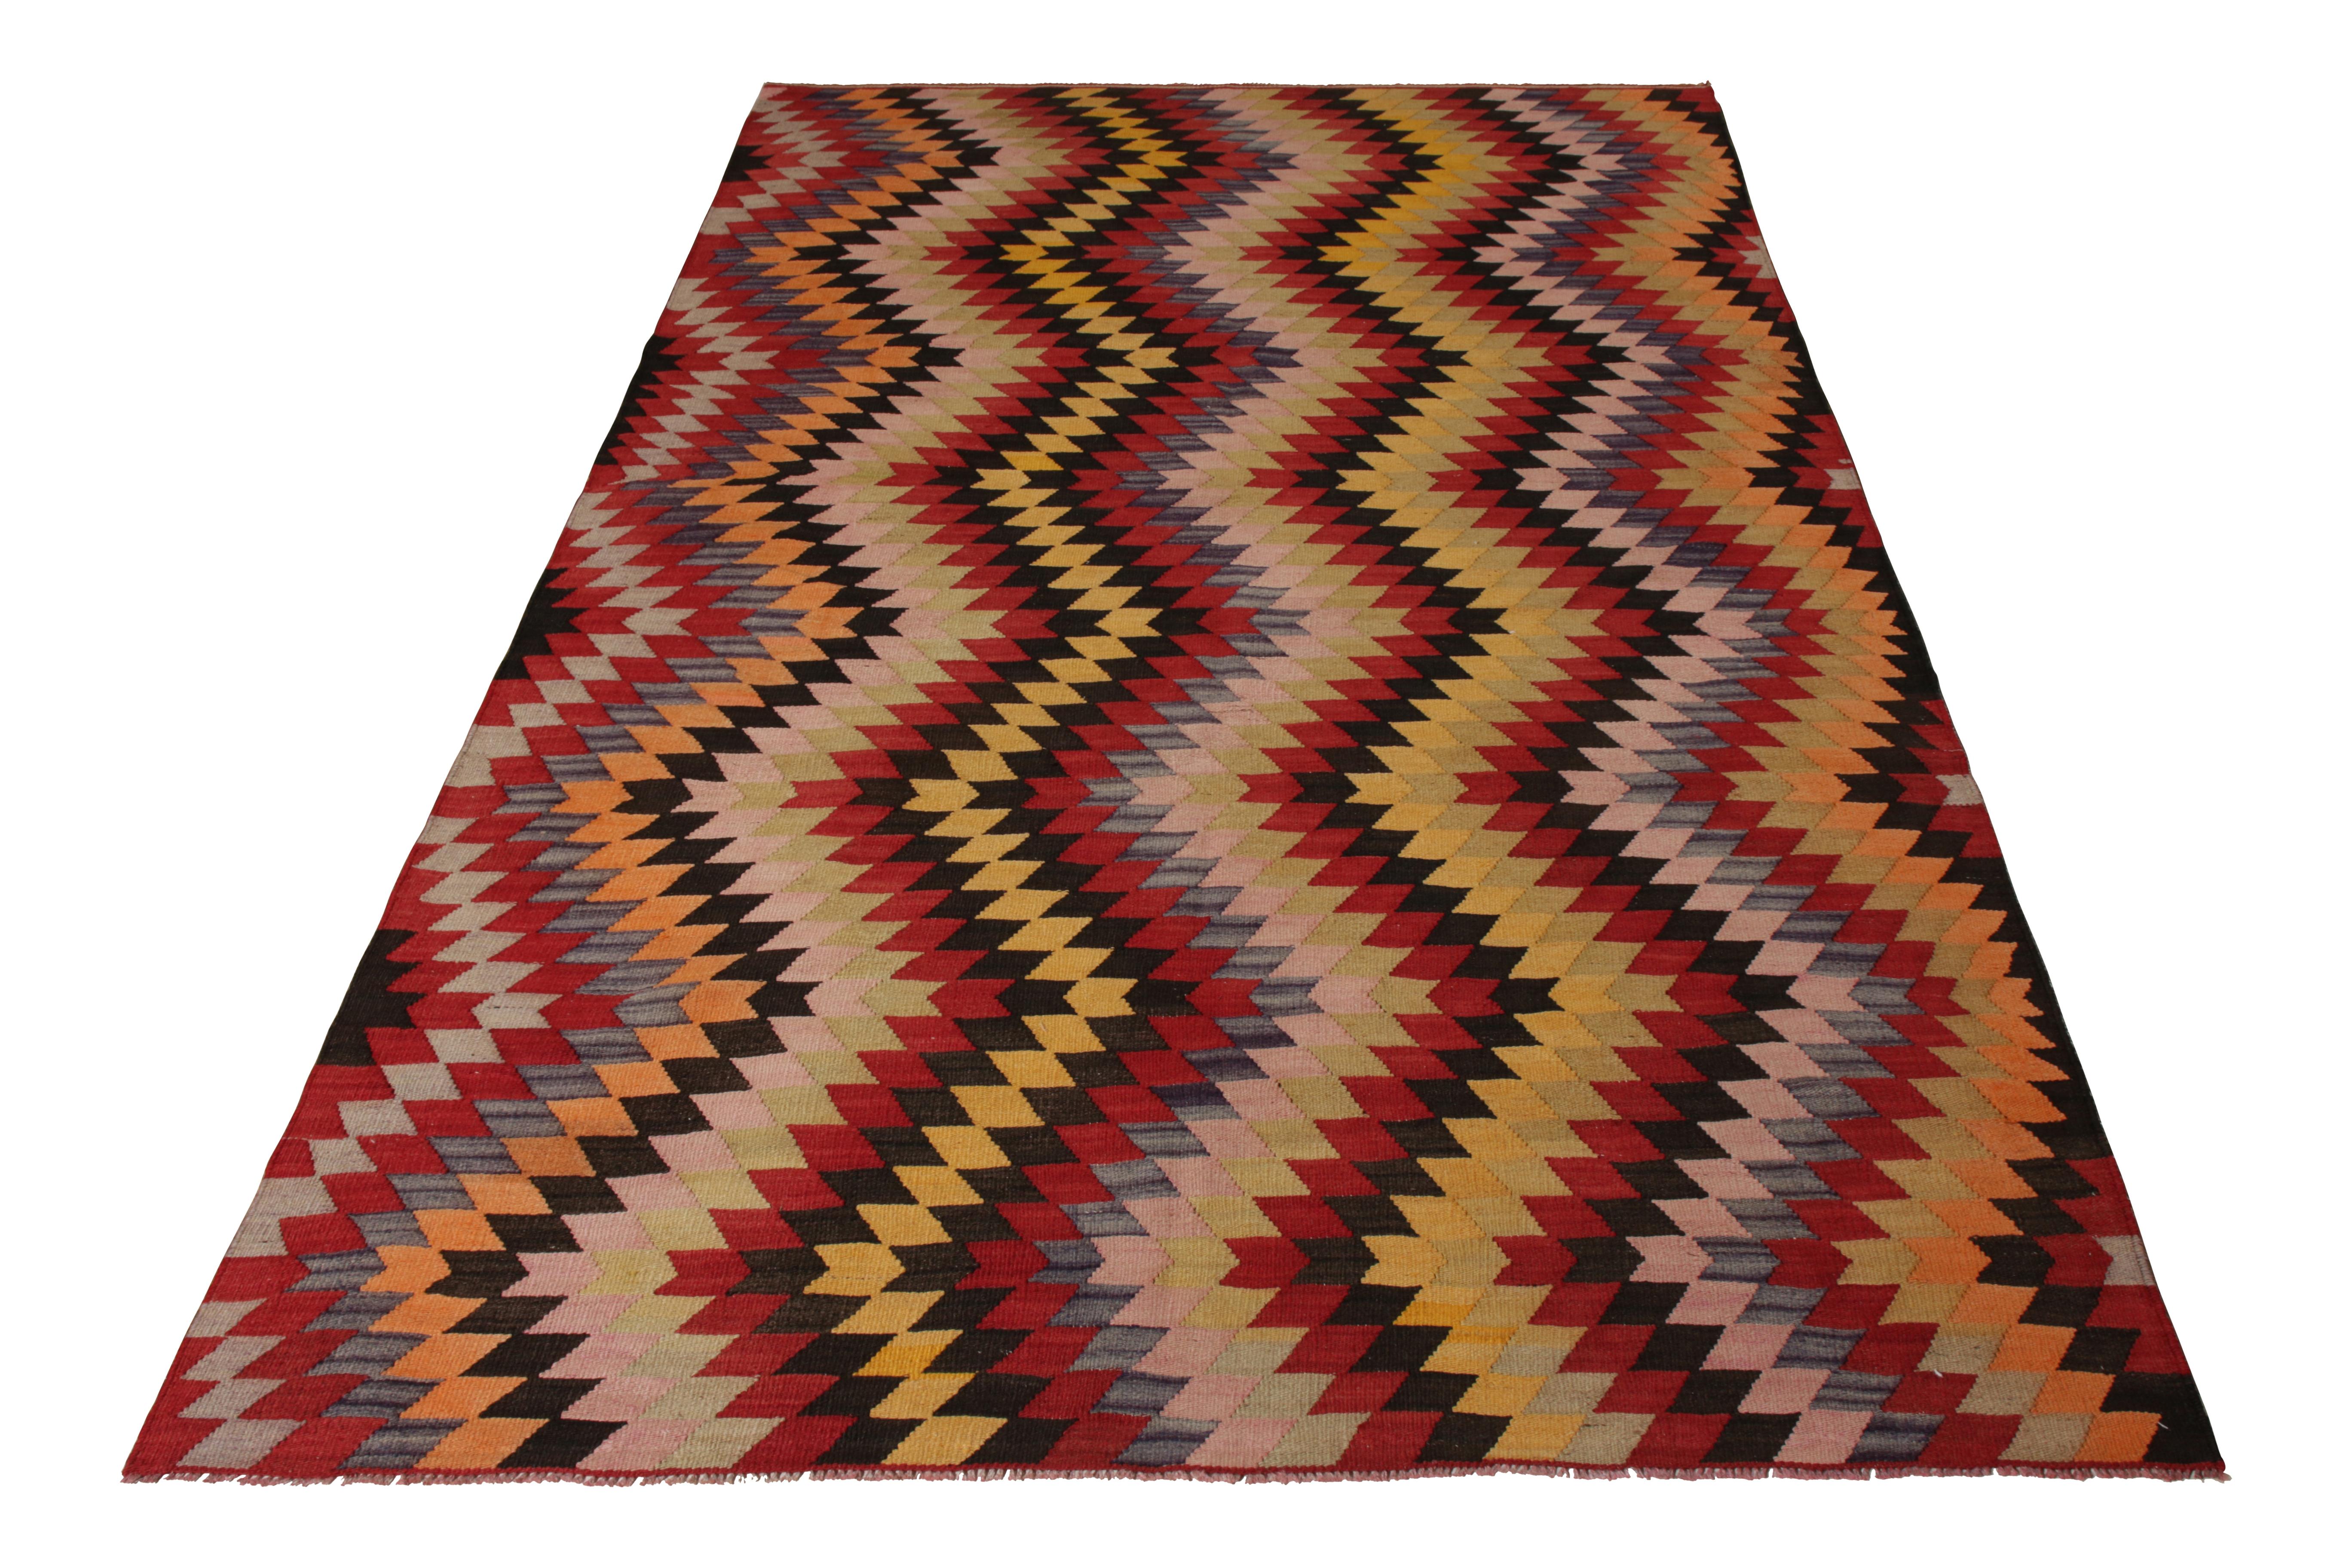 A 5 x 8 vintage Kilim rug of Afyon design lineage, handwoven in wool from Turkey circa 1950-1960. Enjoying a zig-zag Chevron pattern in vibrant stripes of red, gold-yellow, and pink among the playful multicolor hues. Meticulous in its geometry,